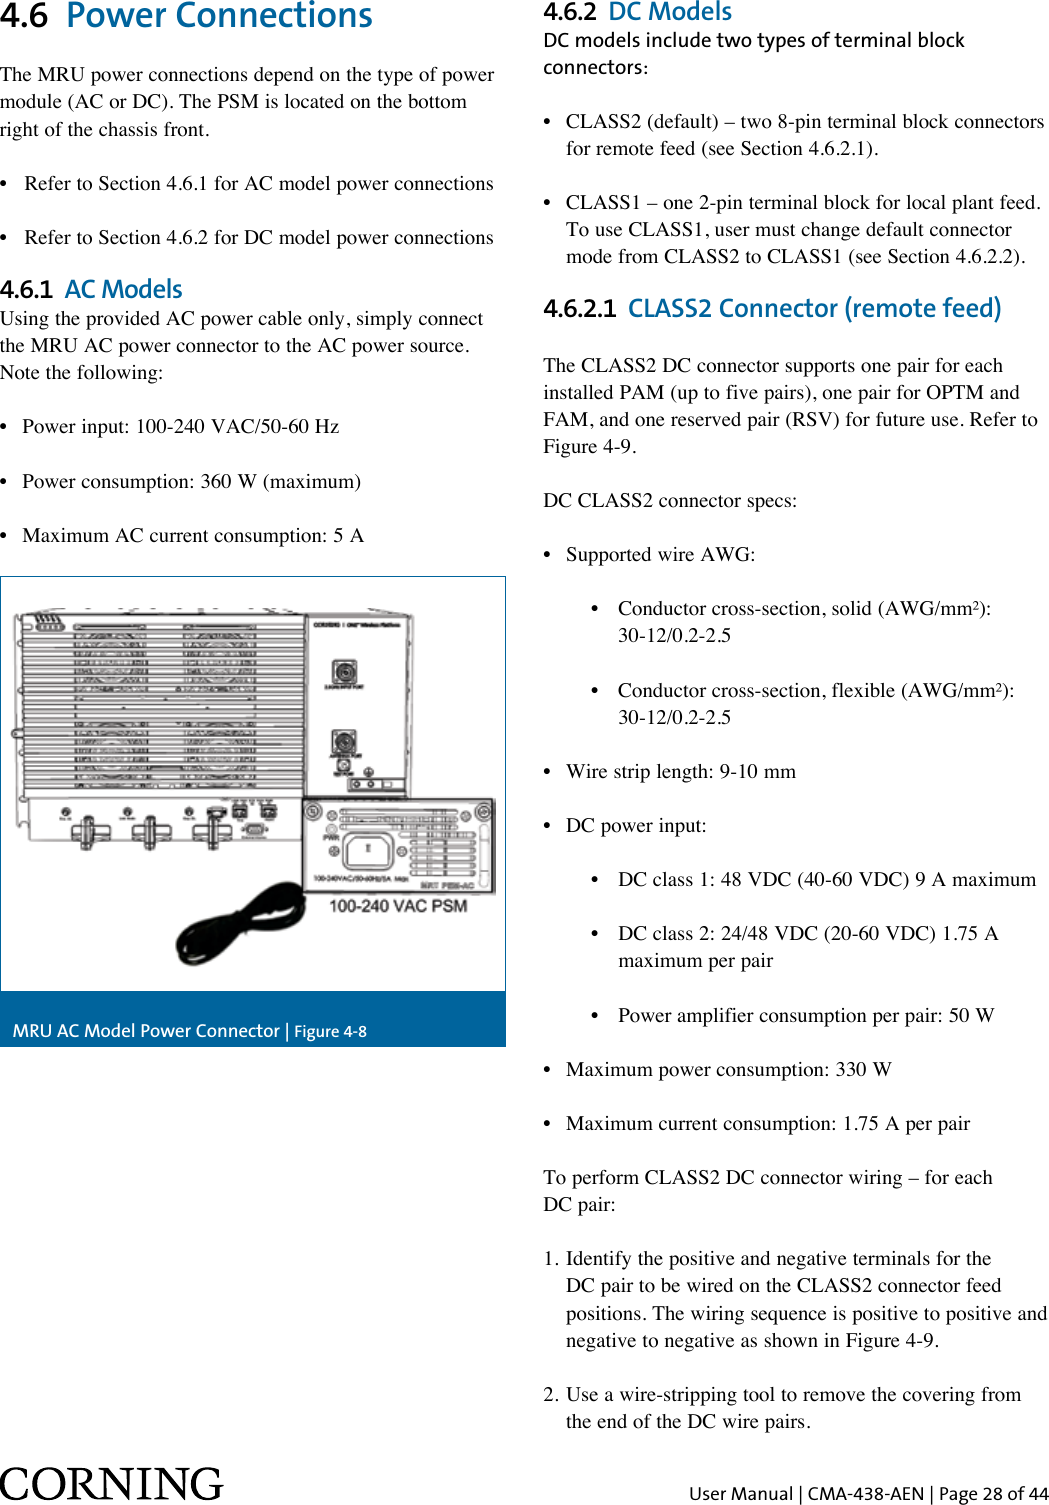 User Manual | CMA-438-AEN | Page 28 of 444.6  Power ConnectionsThe MRU power connections depend on the type of power module (AC or DC). The PSM is located on the bottom right of the chassis front. •  Refer to Section 4.6.1 for AC model power connections•  Refer to Section 4.6.2 for DC model power connections4.6.1  AC ModelsUsing the provided AC power cable only, simply connect the MRU AC power connector to the AC power source.Note the following:•  Power input: 100-240 VAC/50-60 Hz•  Power consumption: 360 W (maximum)•  Maximum AC current consumption: 5 AMRU AC Model Power Connector | Figure 4-84.6.2  DC ModelsDC models include two types of terminal block connectors:•  CLASS2 (default) – two 8-pin terminal block connectors    for remote feed (see Section 4.6.2.1).•  CLASS1 – one 2-pin terminal block for local plant feed.    To use CLASS1, user must change default connector    mode from CLASS2 to CLASS1 (see Section 4.6.2.2).4.6.2.1  CLASS2 Connector (remote feed)The CLASS2 DC connector supports one pair for each installed PAM (up to five pairs), one pair for OPTM and FAM, and one reserved pair (RSV) for future use. Refer to Figure 4-9. DC CLASS2 connector specs:•  Supported wire AWG:      •  Conductor cross-section, solid (AWG/mm²):         30-12/0.2-2.5      •  Conductor cross-section, flexible (AWG/mm²):         30-12/0.2-2.5•  Wire strip length: 9-10 mm•  DC power input:      •  DC class 1: 48 VDC (40-60 VDC) 9 A maximum      •  DC class 2: 24/48 VDC (20-60 VDC) 1.75 A          maximum per pair      •  Power amplifier consumption per pair: 50 W•  Maximum power consumption: 330 W•  Maximum current consumption: 1.75 A per pairTo perform CLASS2 DC connector wiring – for each  DC pair:1.  Identify the positive and negative terminals for the DC pair to be wired on the CLASS2 connector feed positions. The wiring sequence is positive to positive and negative to negative as shown in Figure 4-9.2. Use a wire-stripping tool to remove the covering from    the end of the DC wire pairs.